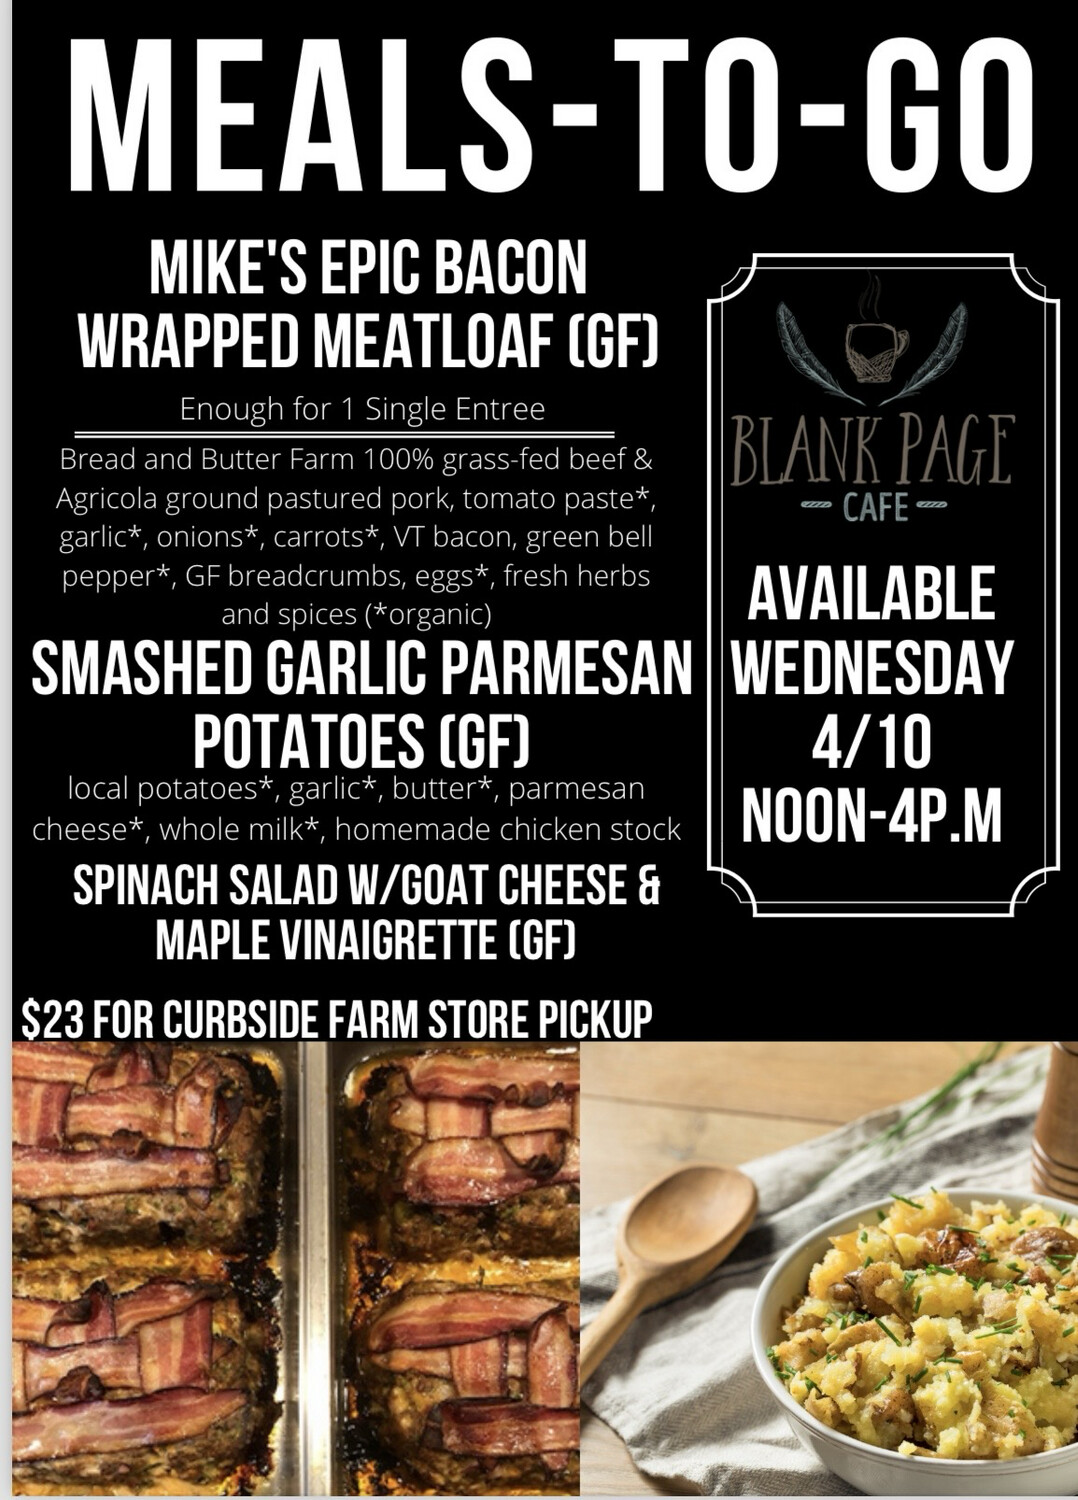 Wednesday 4/10 NOON-4PM PICKUP - Mike's EPIC Bacon Wrapped Meatloaf + Garlic Parmesan Smashed Potatoes + Spinach Salad W/Goat Cheese & Maple Vinaigrette